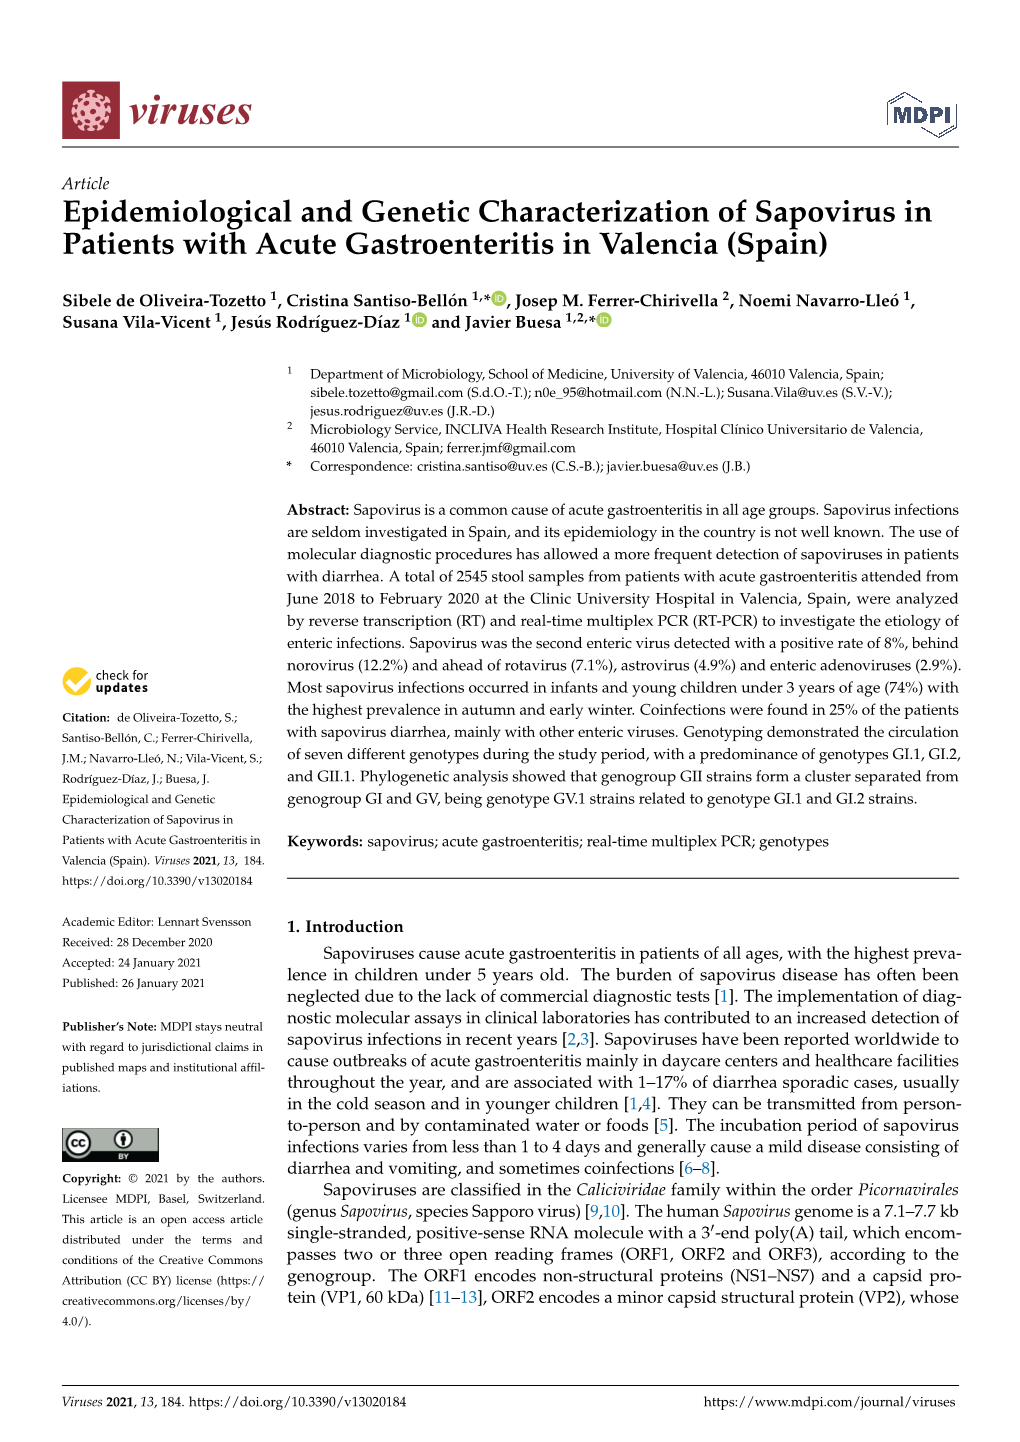 Epidemiological and Genetic Characterization of Sapovirus in Patients with Acute Gastroenteritis in Valencia (Spain)